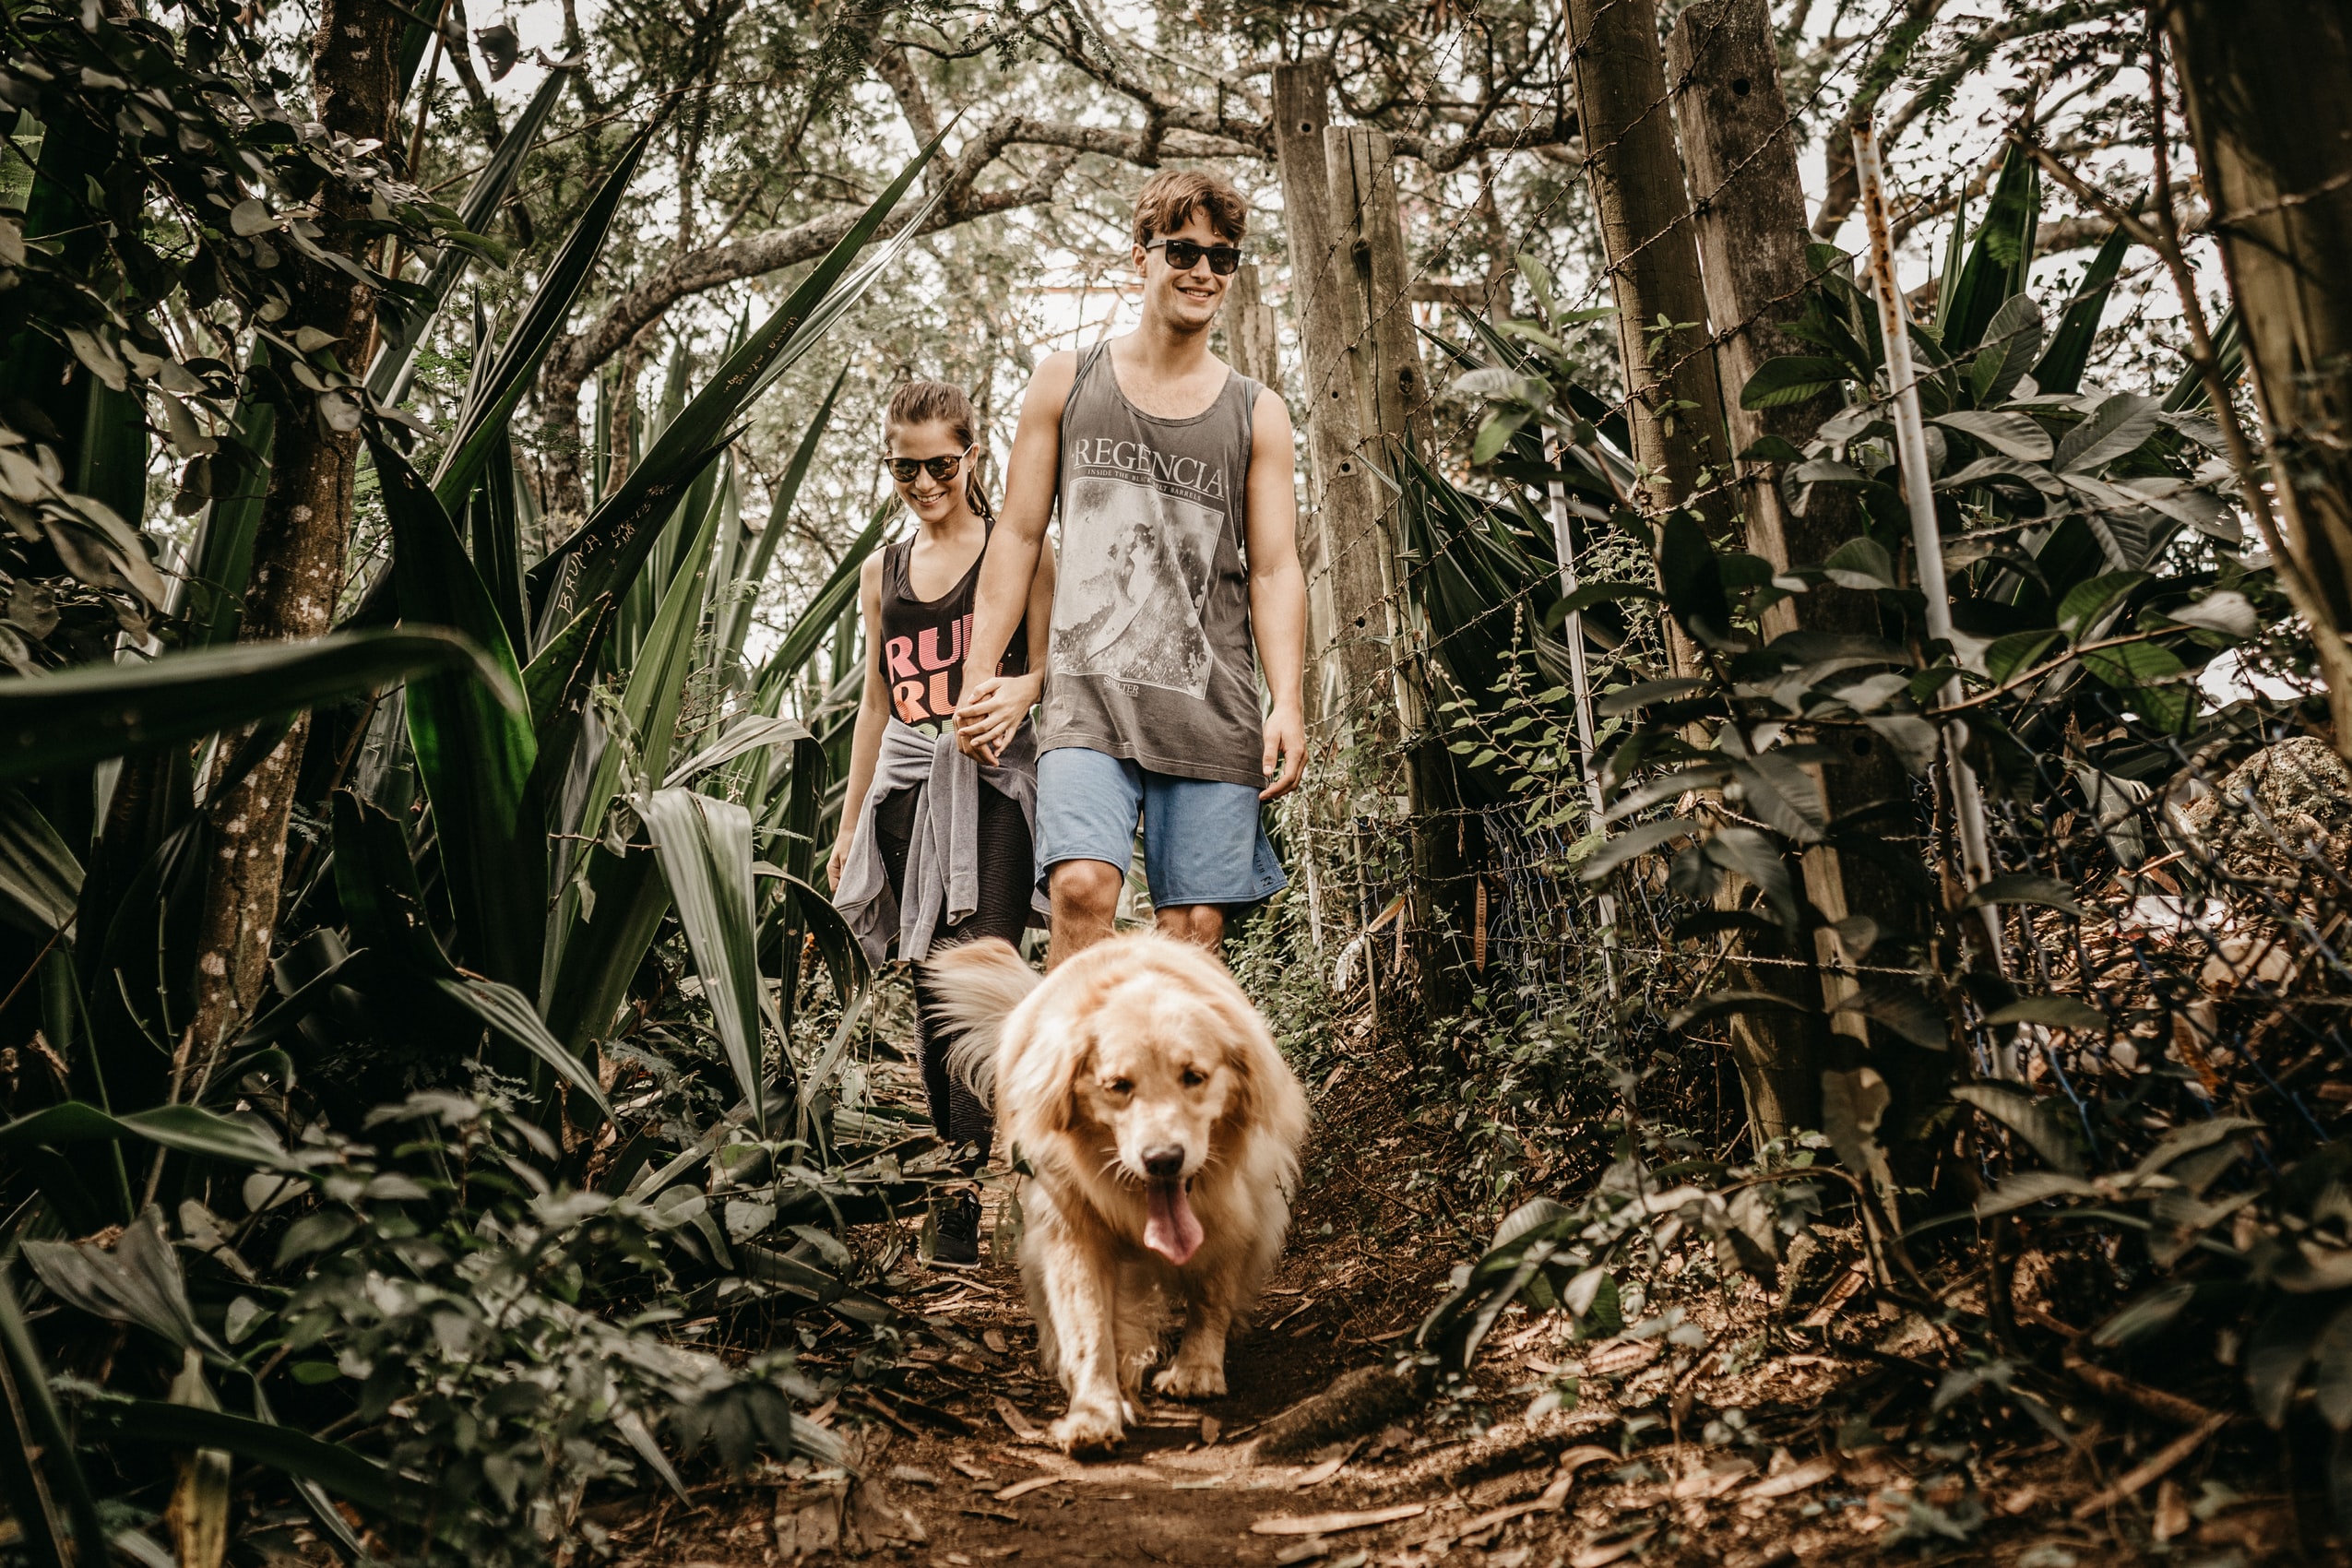 The potentially life-extending benefits of dog ownership could be traced in part to increased physical activity from walking the dog, scientists speculate. The study found dog owners were less likely to die from heart disease compared with non-owners.